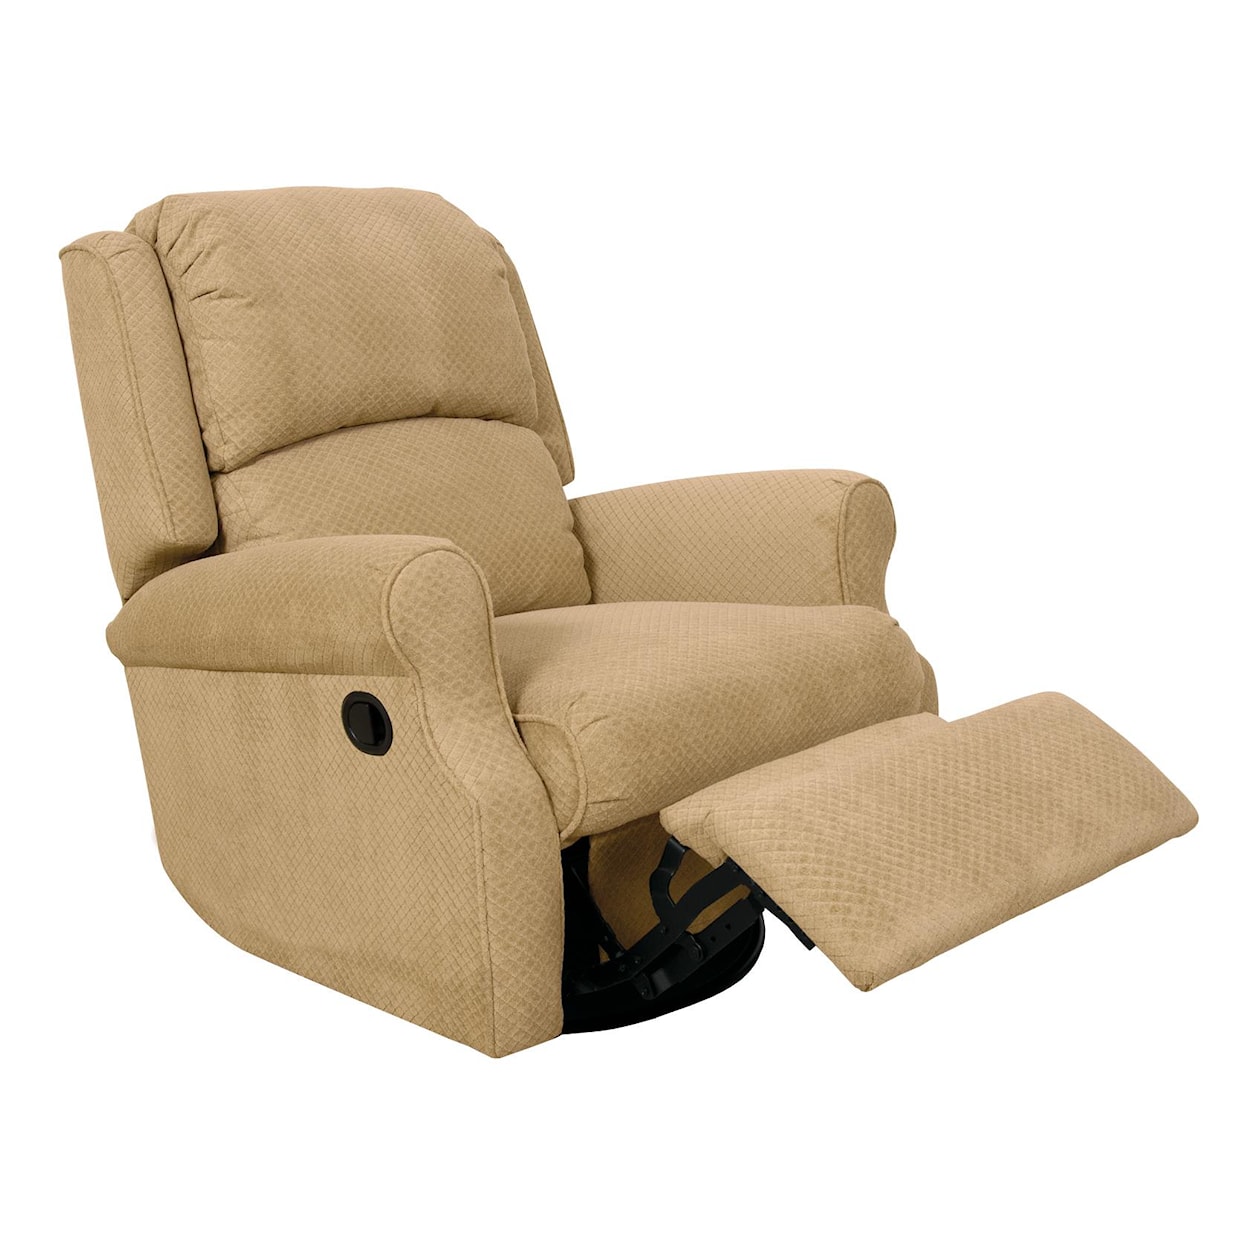 Tennessee Custom Upholstery 210 Series Reclining Lift Chair